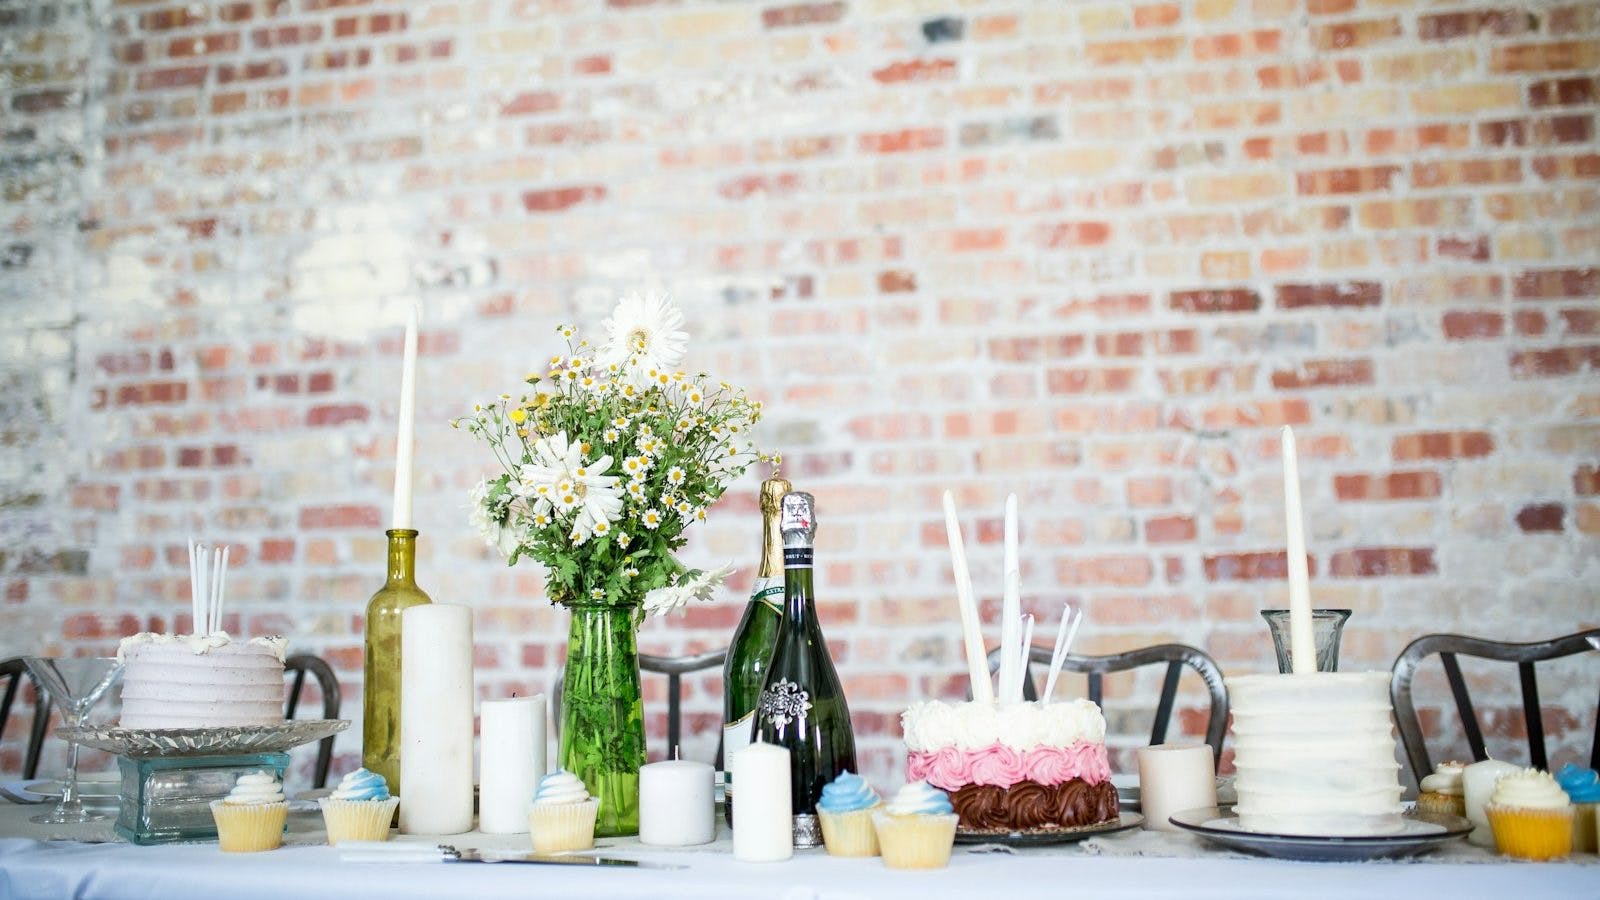 cake beside candles and flowers